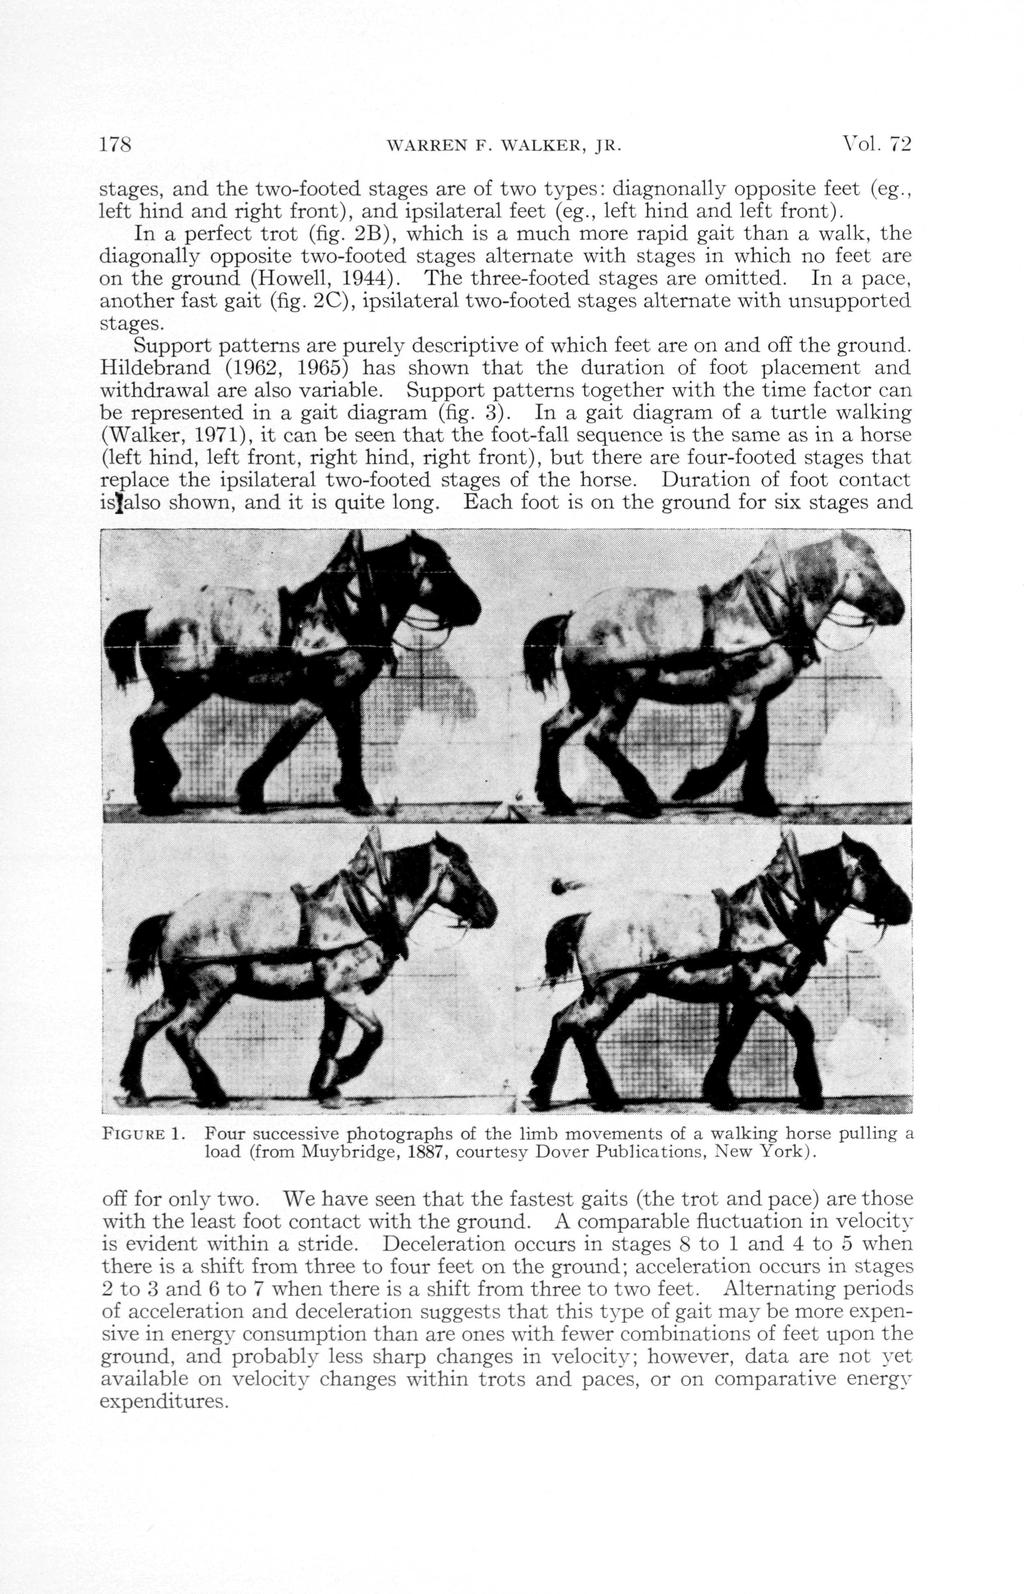 178 WARREN F. WALKER, JR. Vol. 72 stages, and the two-footed stages are of two types: diagnonally opposite feet (eg., left hind and right front), and ipsilateral feet (eg., left hind and left front).